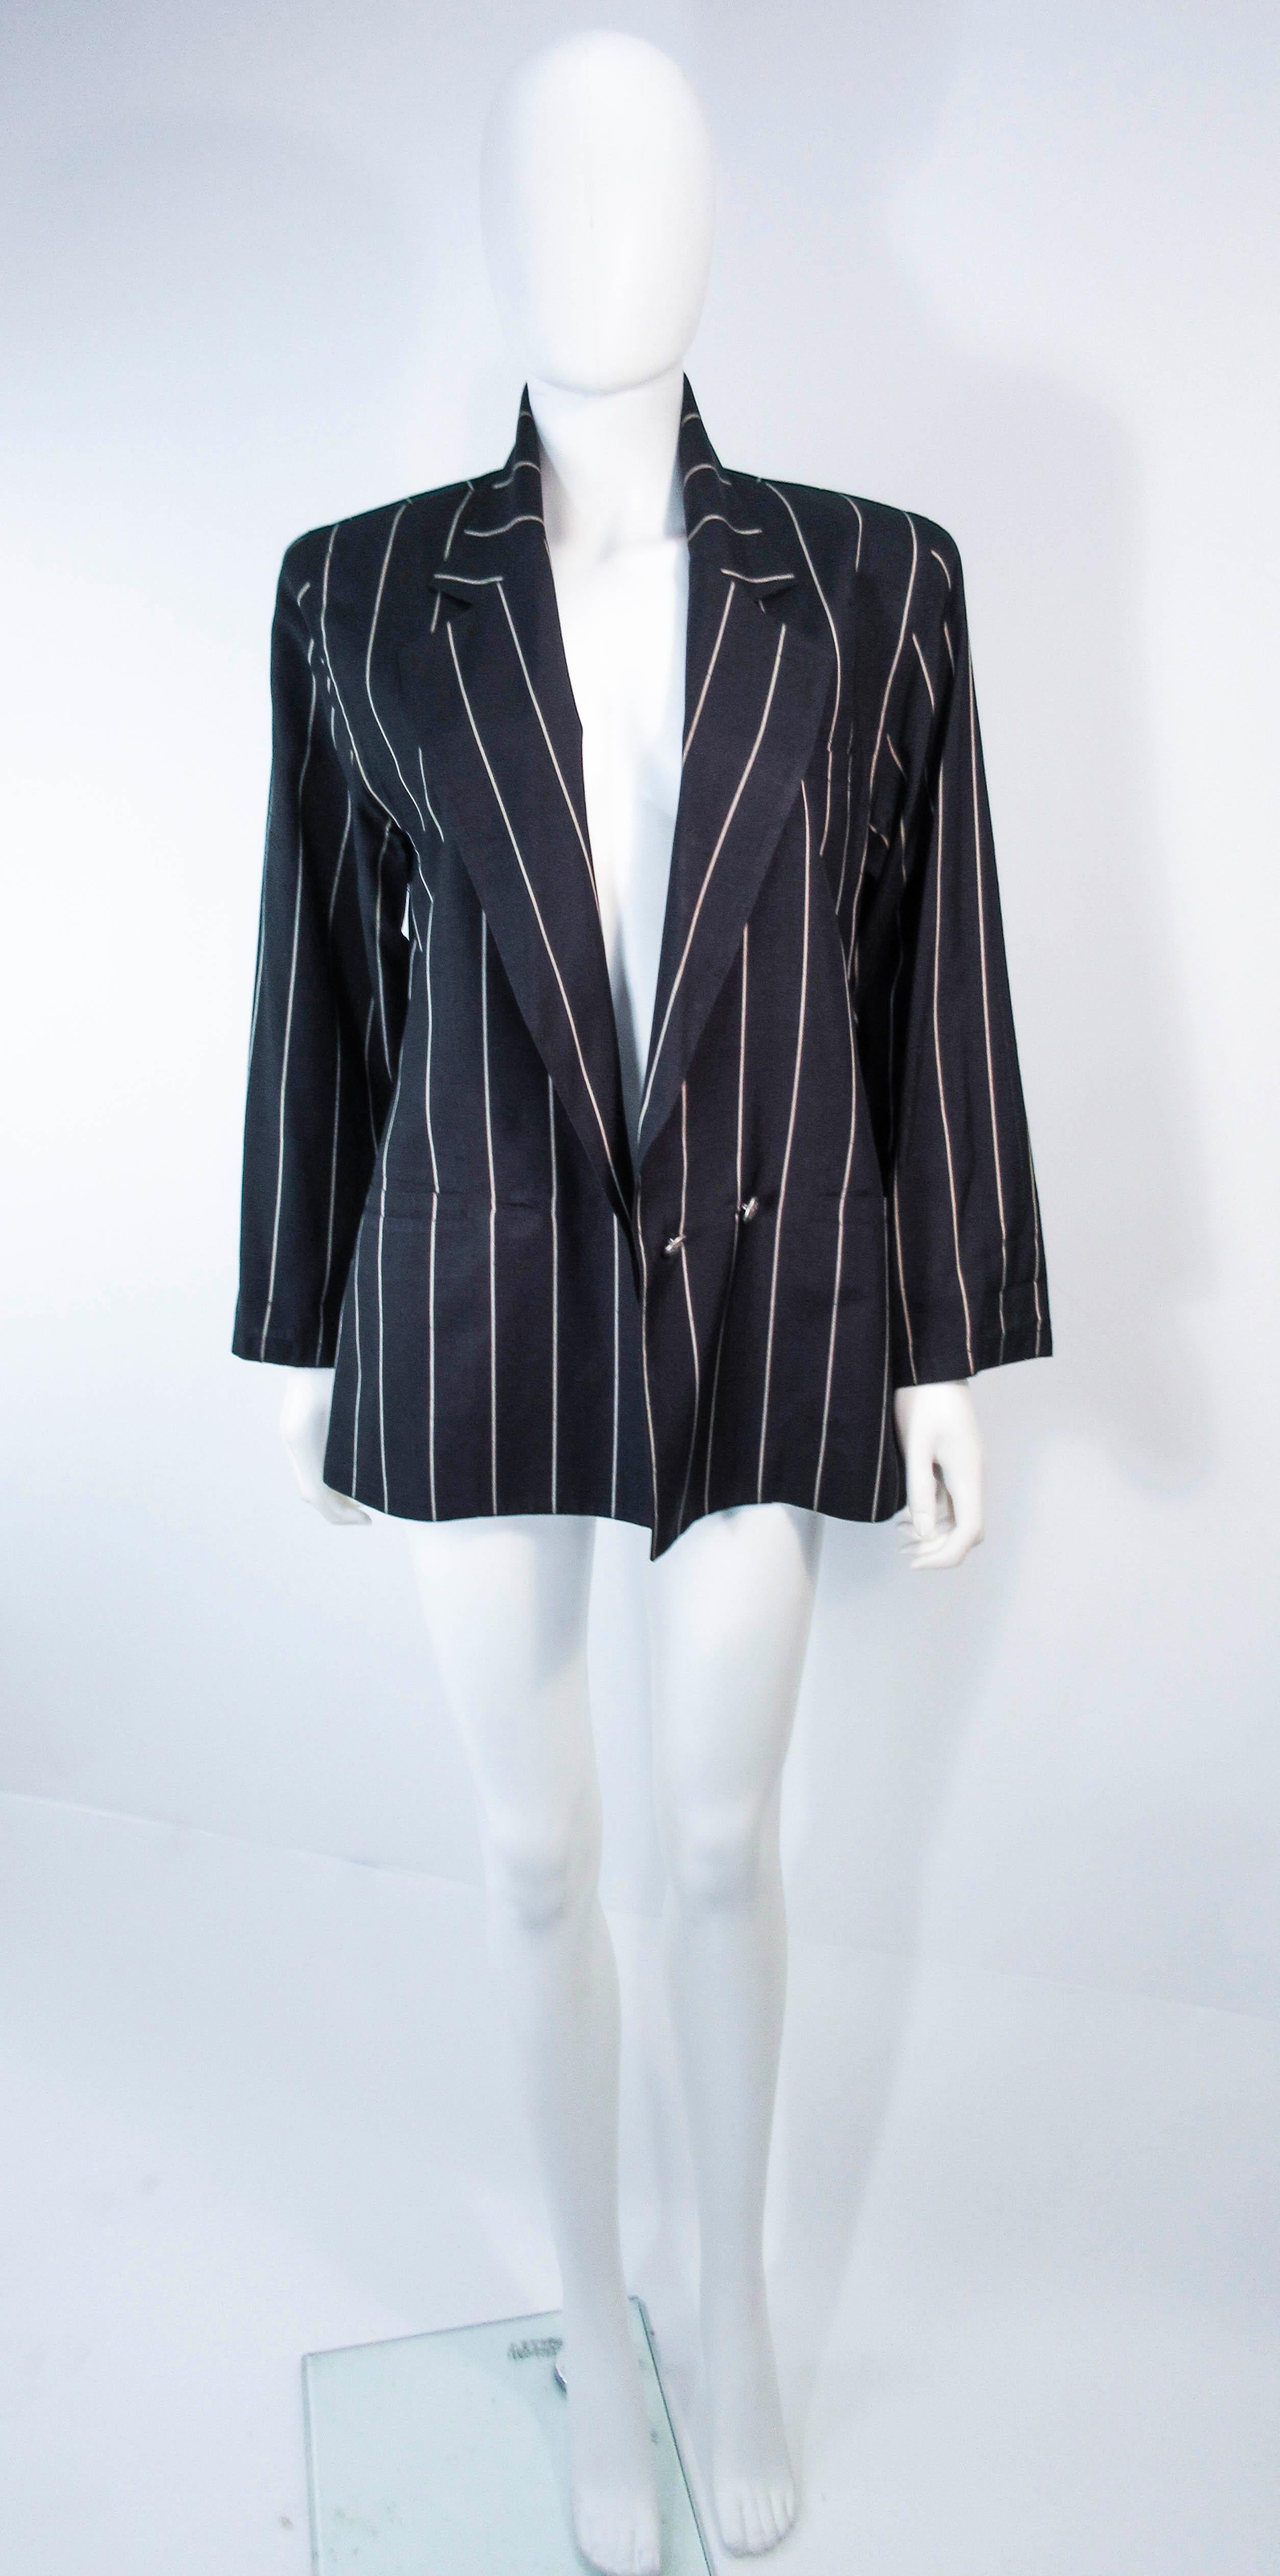 GIANNI VERSACE Black & Cream Striped Jacket Size 6 For Sale 1